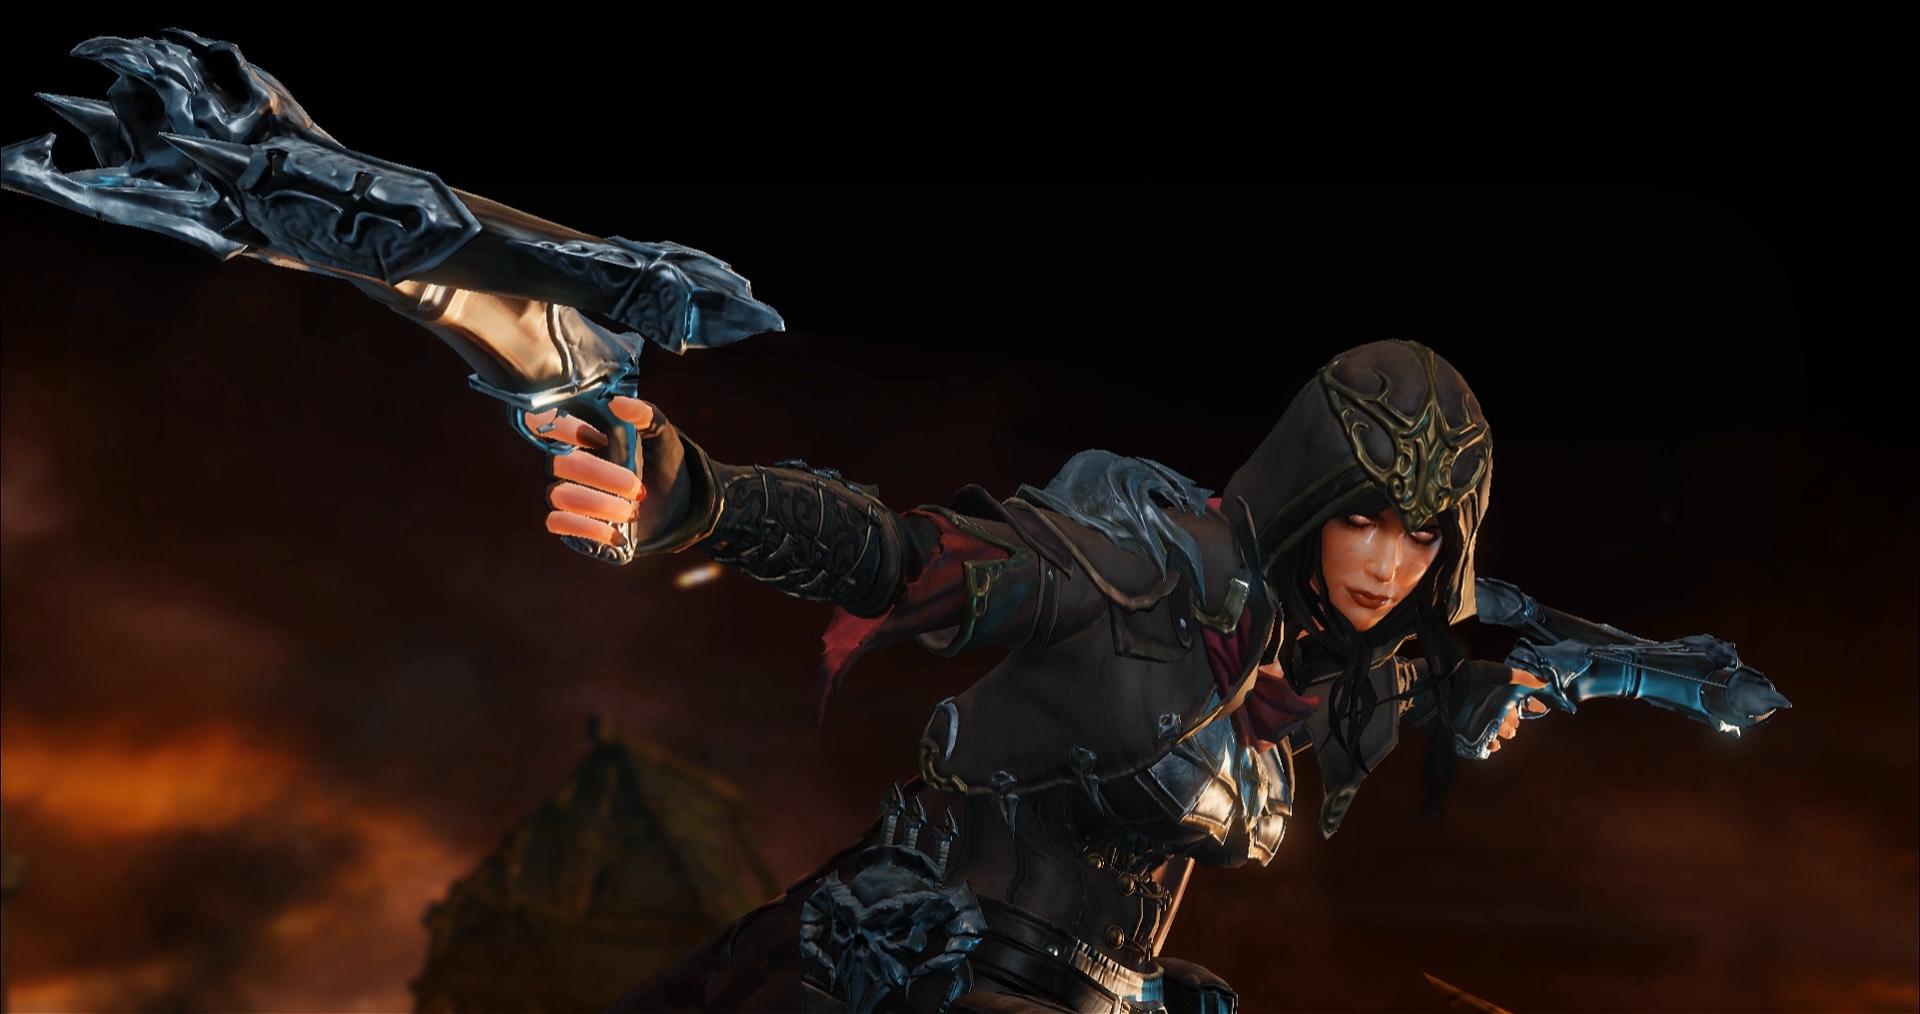 Demon Hunter deals ranged damage and provides mobility to avoid the focus of combat.